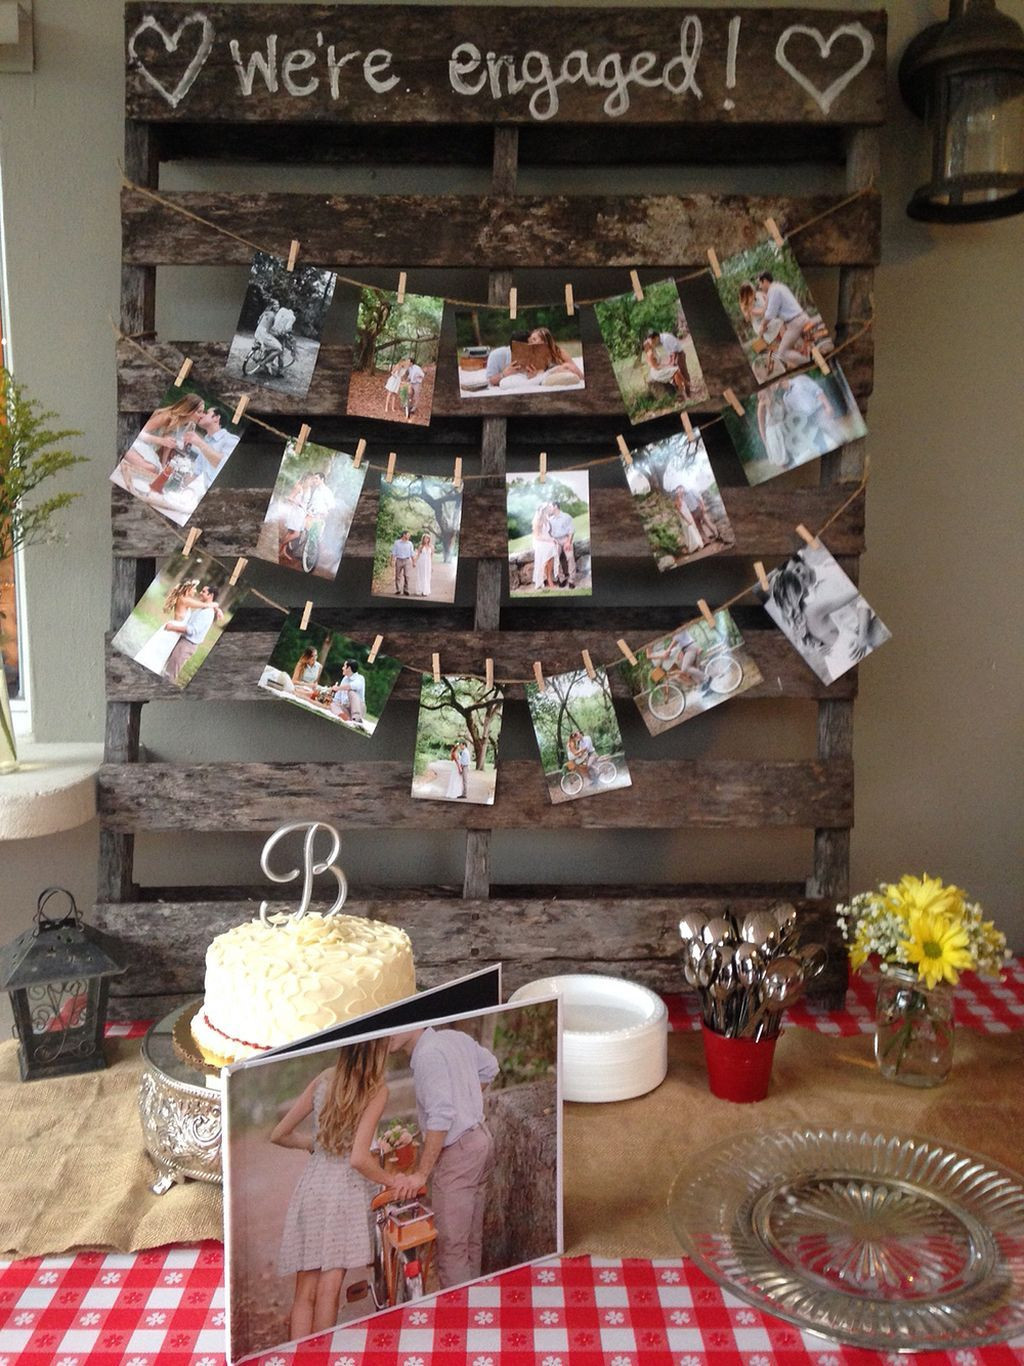 Outdoor Engagement Party Decoration Ideas
 Tips for Looking Your Best on Your Wedding Day